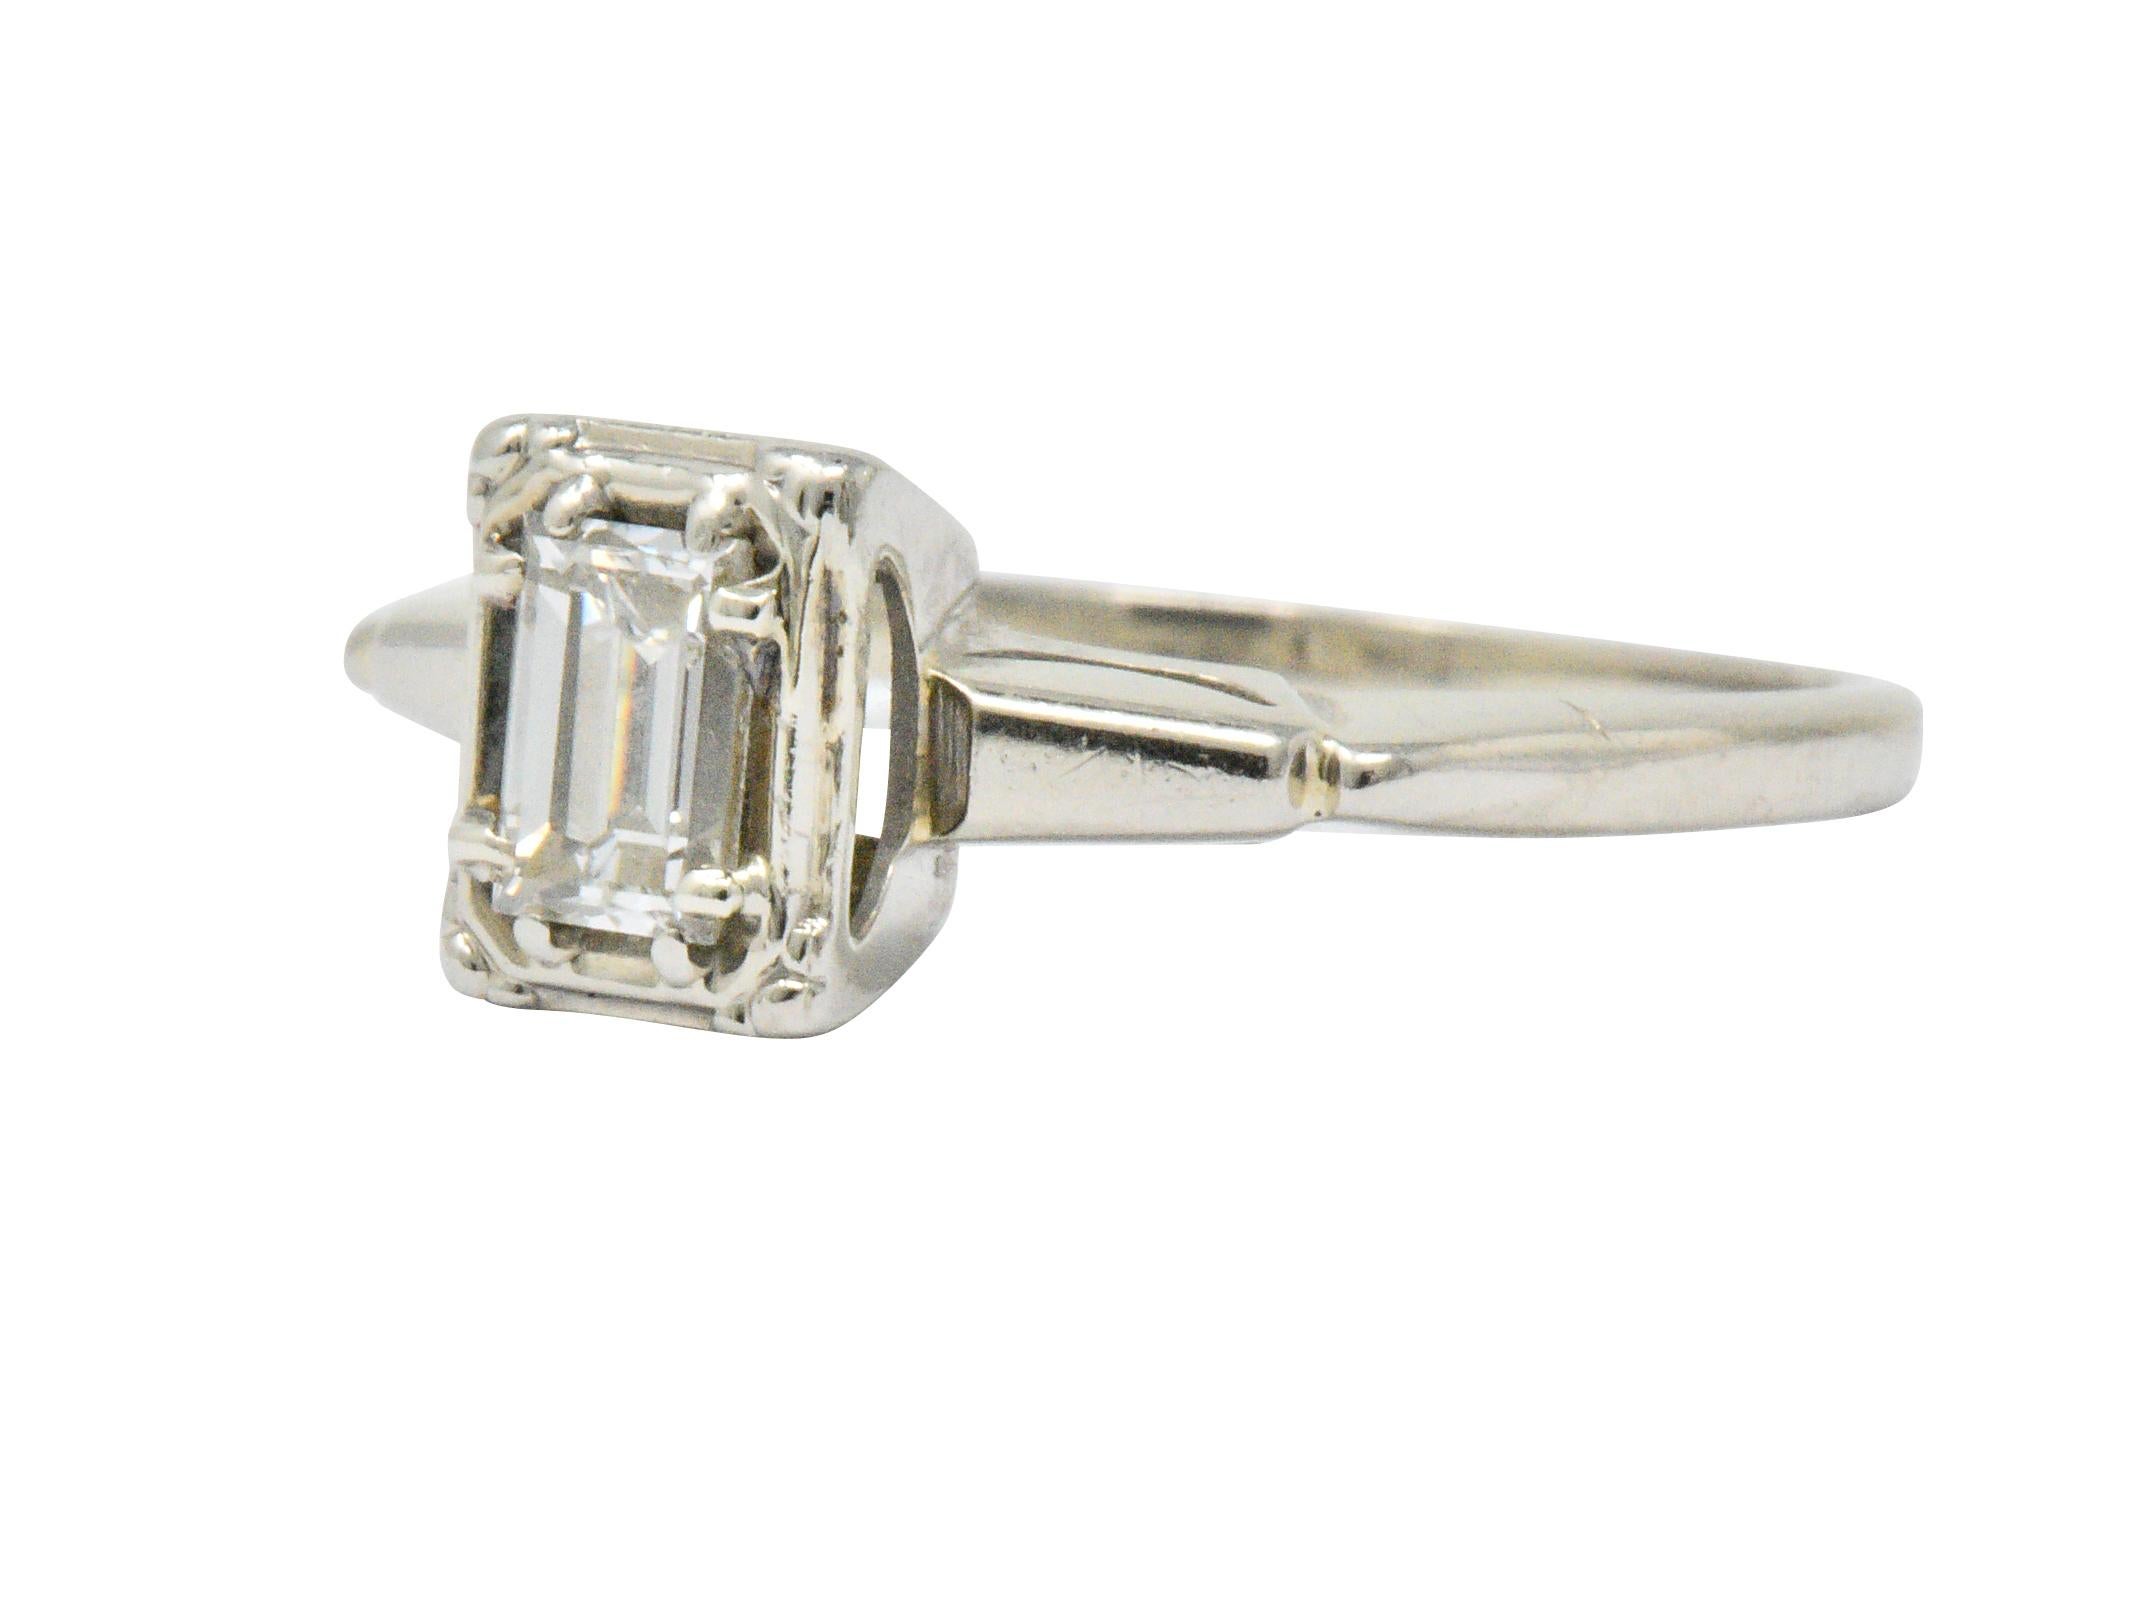 Centering an emerald cut diamond weighing approximately 0.35 carats, G color and VS clarity

In an illusion mount with highly polished tapered shoulders

Stamped P-K

Ring Size: 5 & Sizable

Top measures 7.1 mm and sits 5.6 mm high

Total Weight: